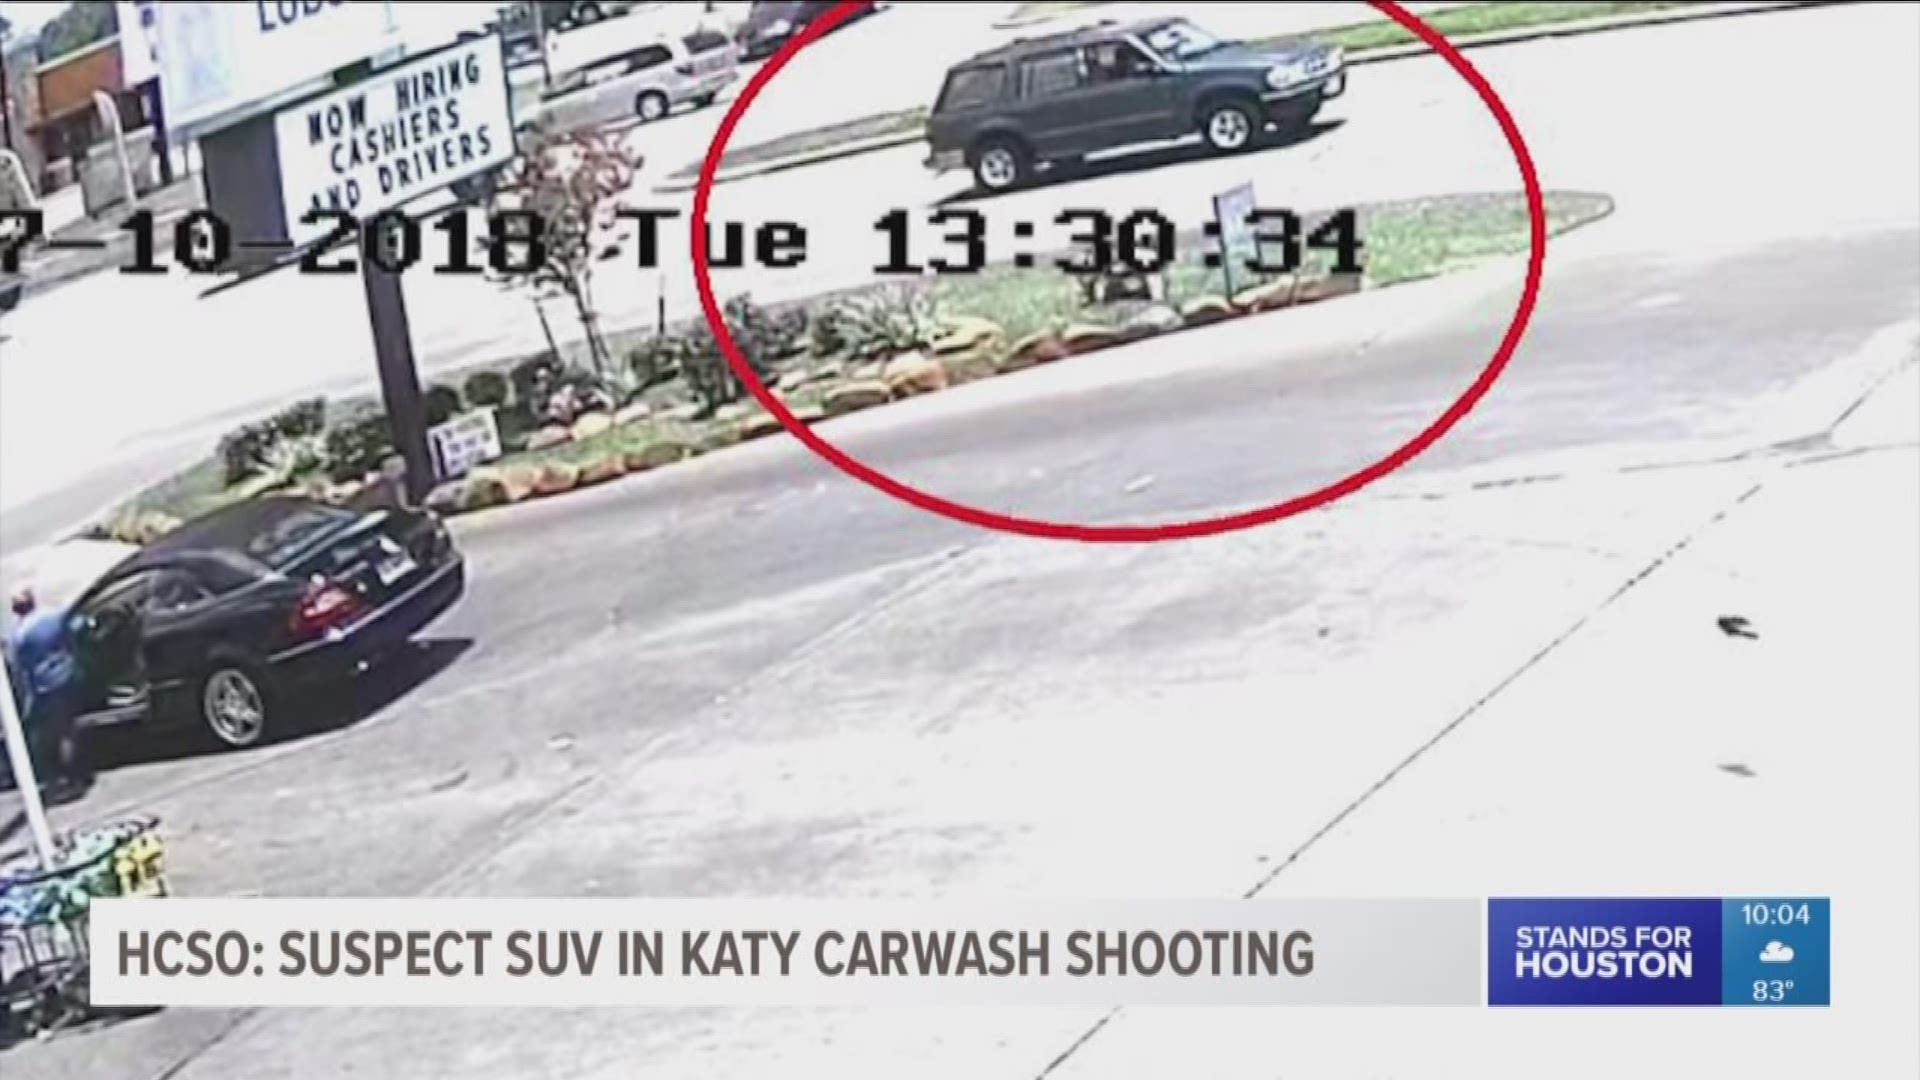 Investigators with the Harris County Sheriff's Office released a photo Wednesday of a vehicle they believe was involved in a shooting that injured a woman at a Katy car wash.